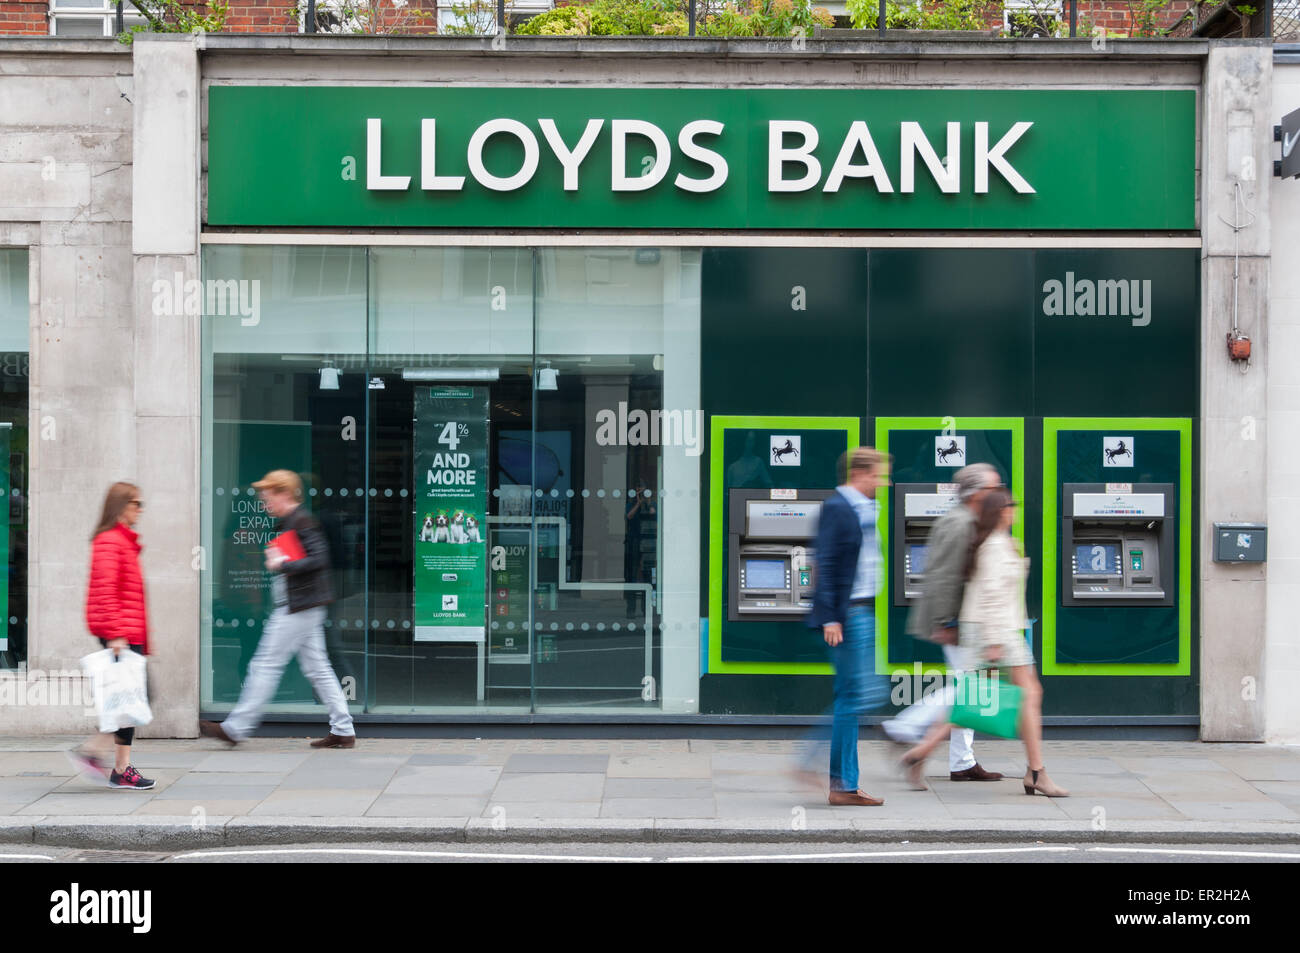 People walking past a Lloyds bank branch in London Stock Photo